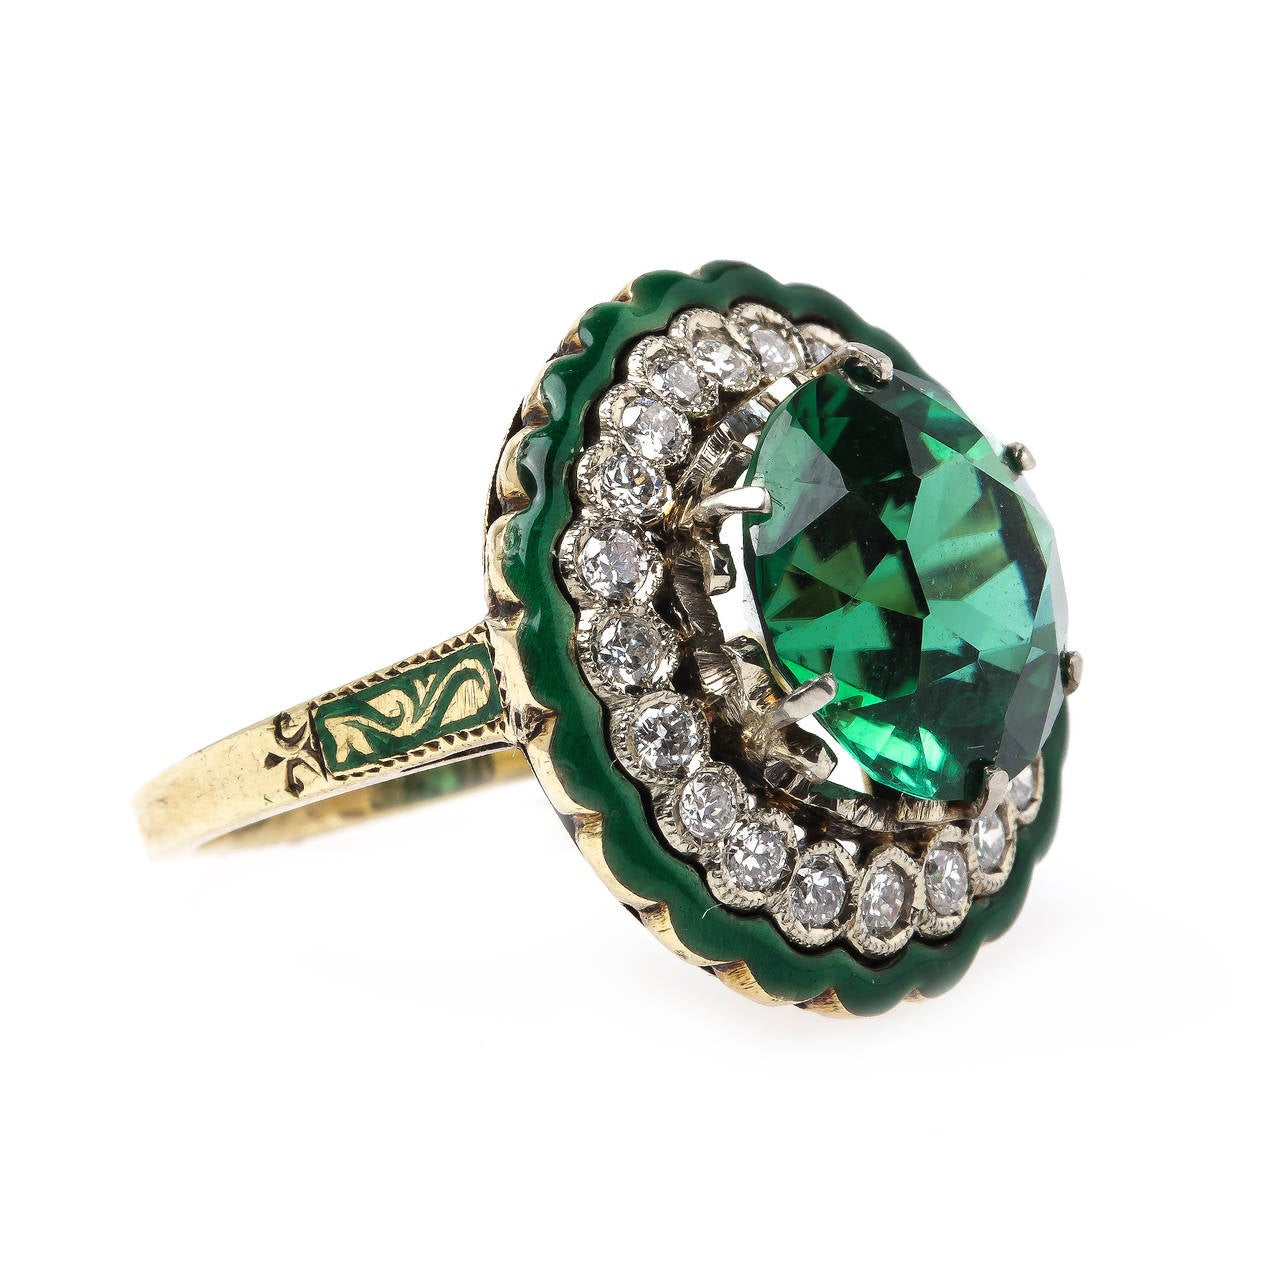 Clifton is an extraordinary authentic Retro era (circa 1940) 14k yellow gold ring centering six-prong set important 5.45cts dark blue-green tourmaline accompanied with a Guild Laboratories certificate. An exquisite halo of twenty-one bezel set